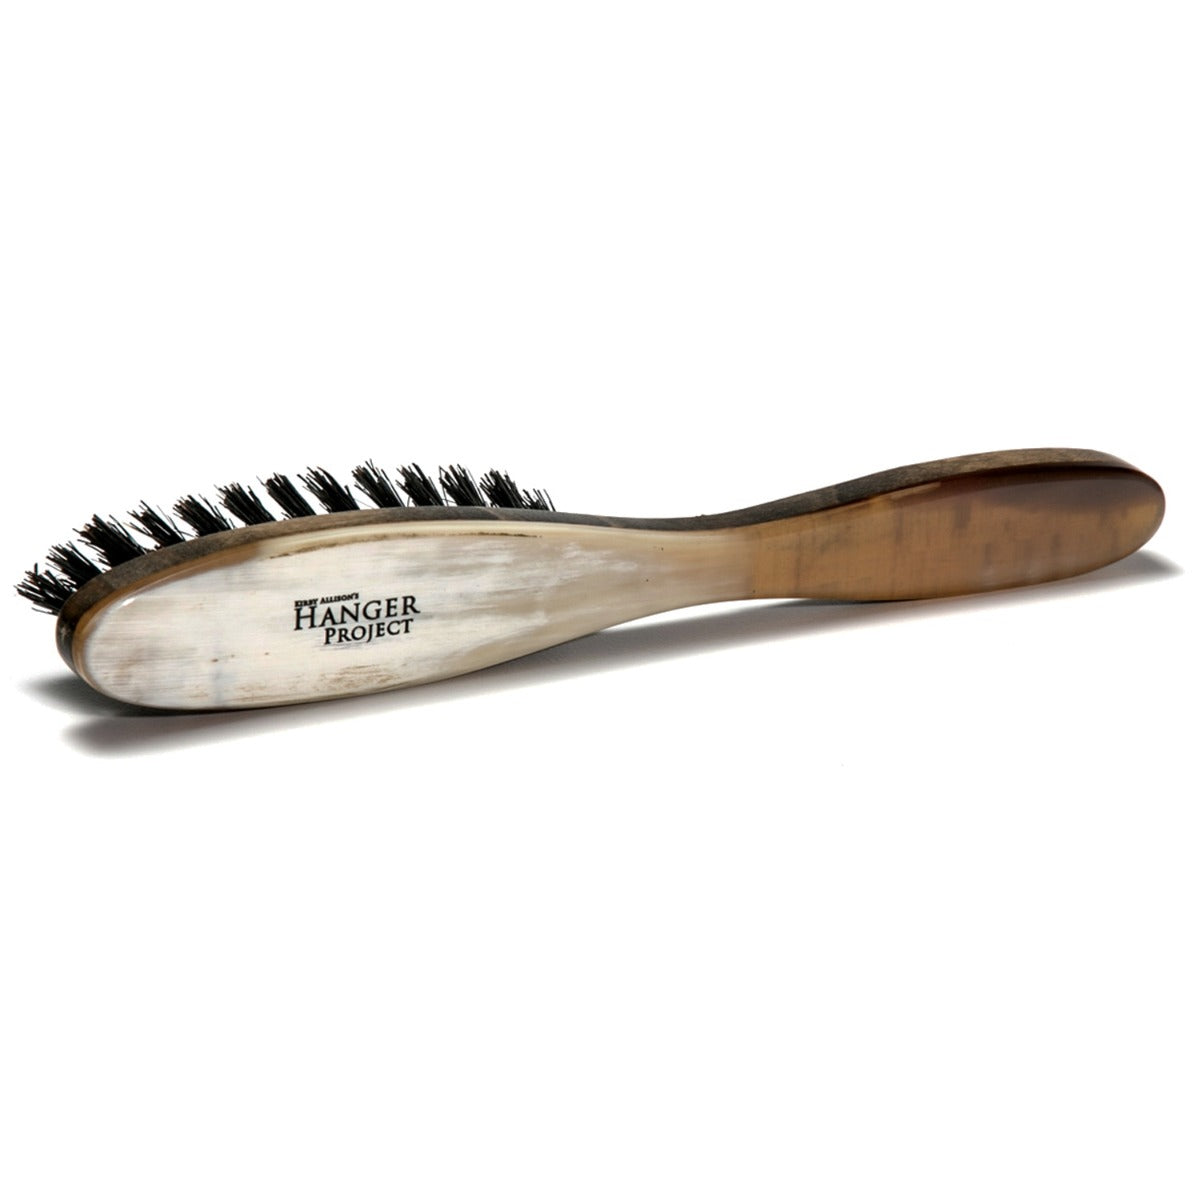 A Wellington Horn-Backed Suede Cleaning Brush with a wooden handle for maintaining suede items, available at KirbyAllison.com.